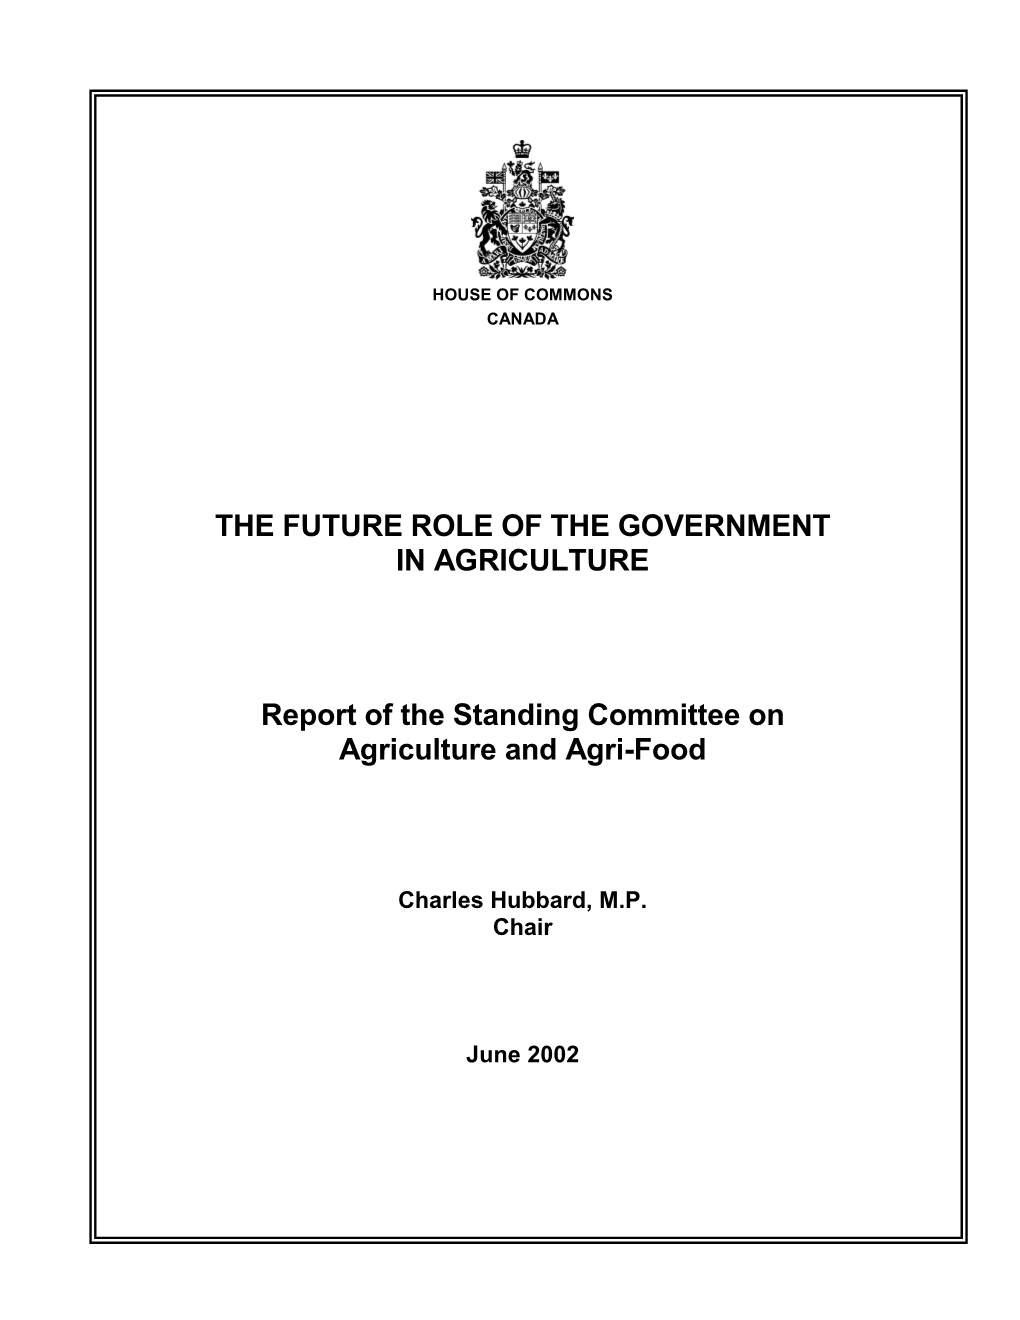 Standing Committee on Agriculture and Agri-Food